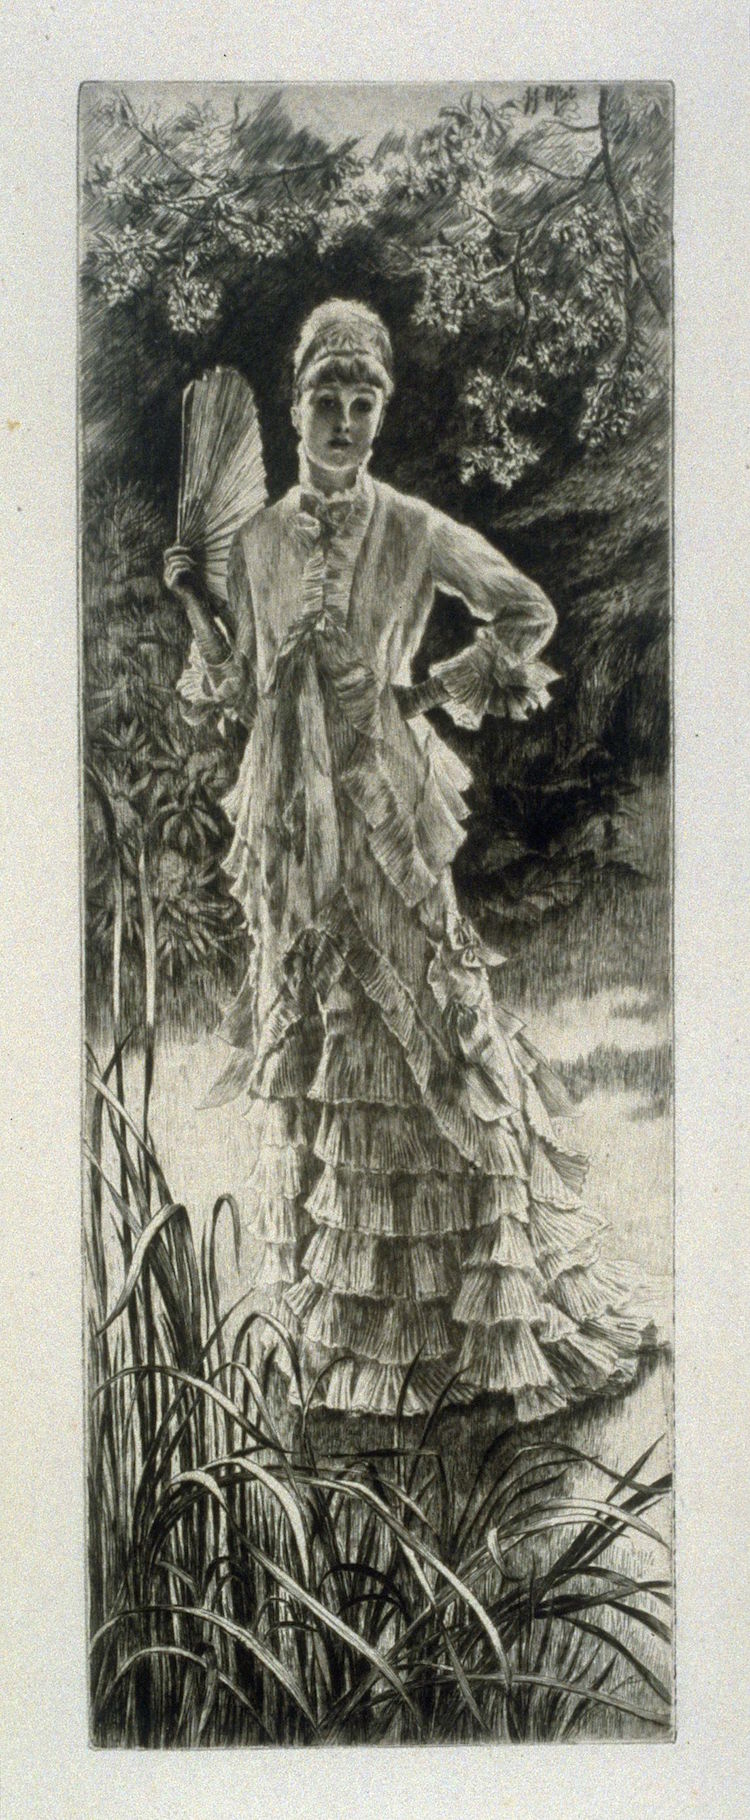 James Tissot, French, 1836–1902 "Spring," 1878. Etching and drypoint 14.8125 x 5.3125 in. (37.7 x 13.5 cm) Fine Arts Museums of San Francisco